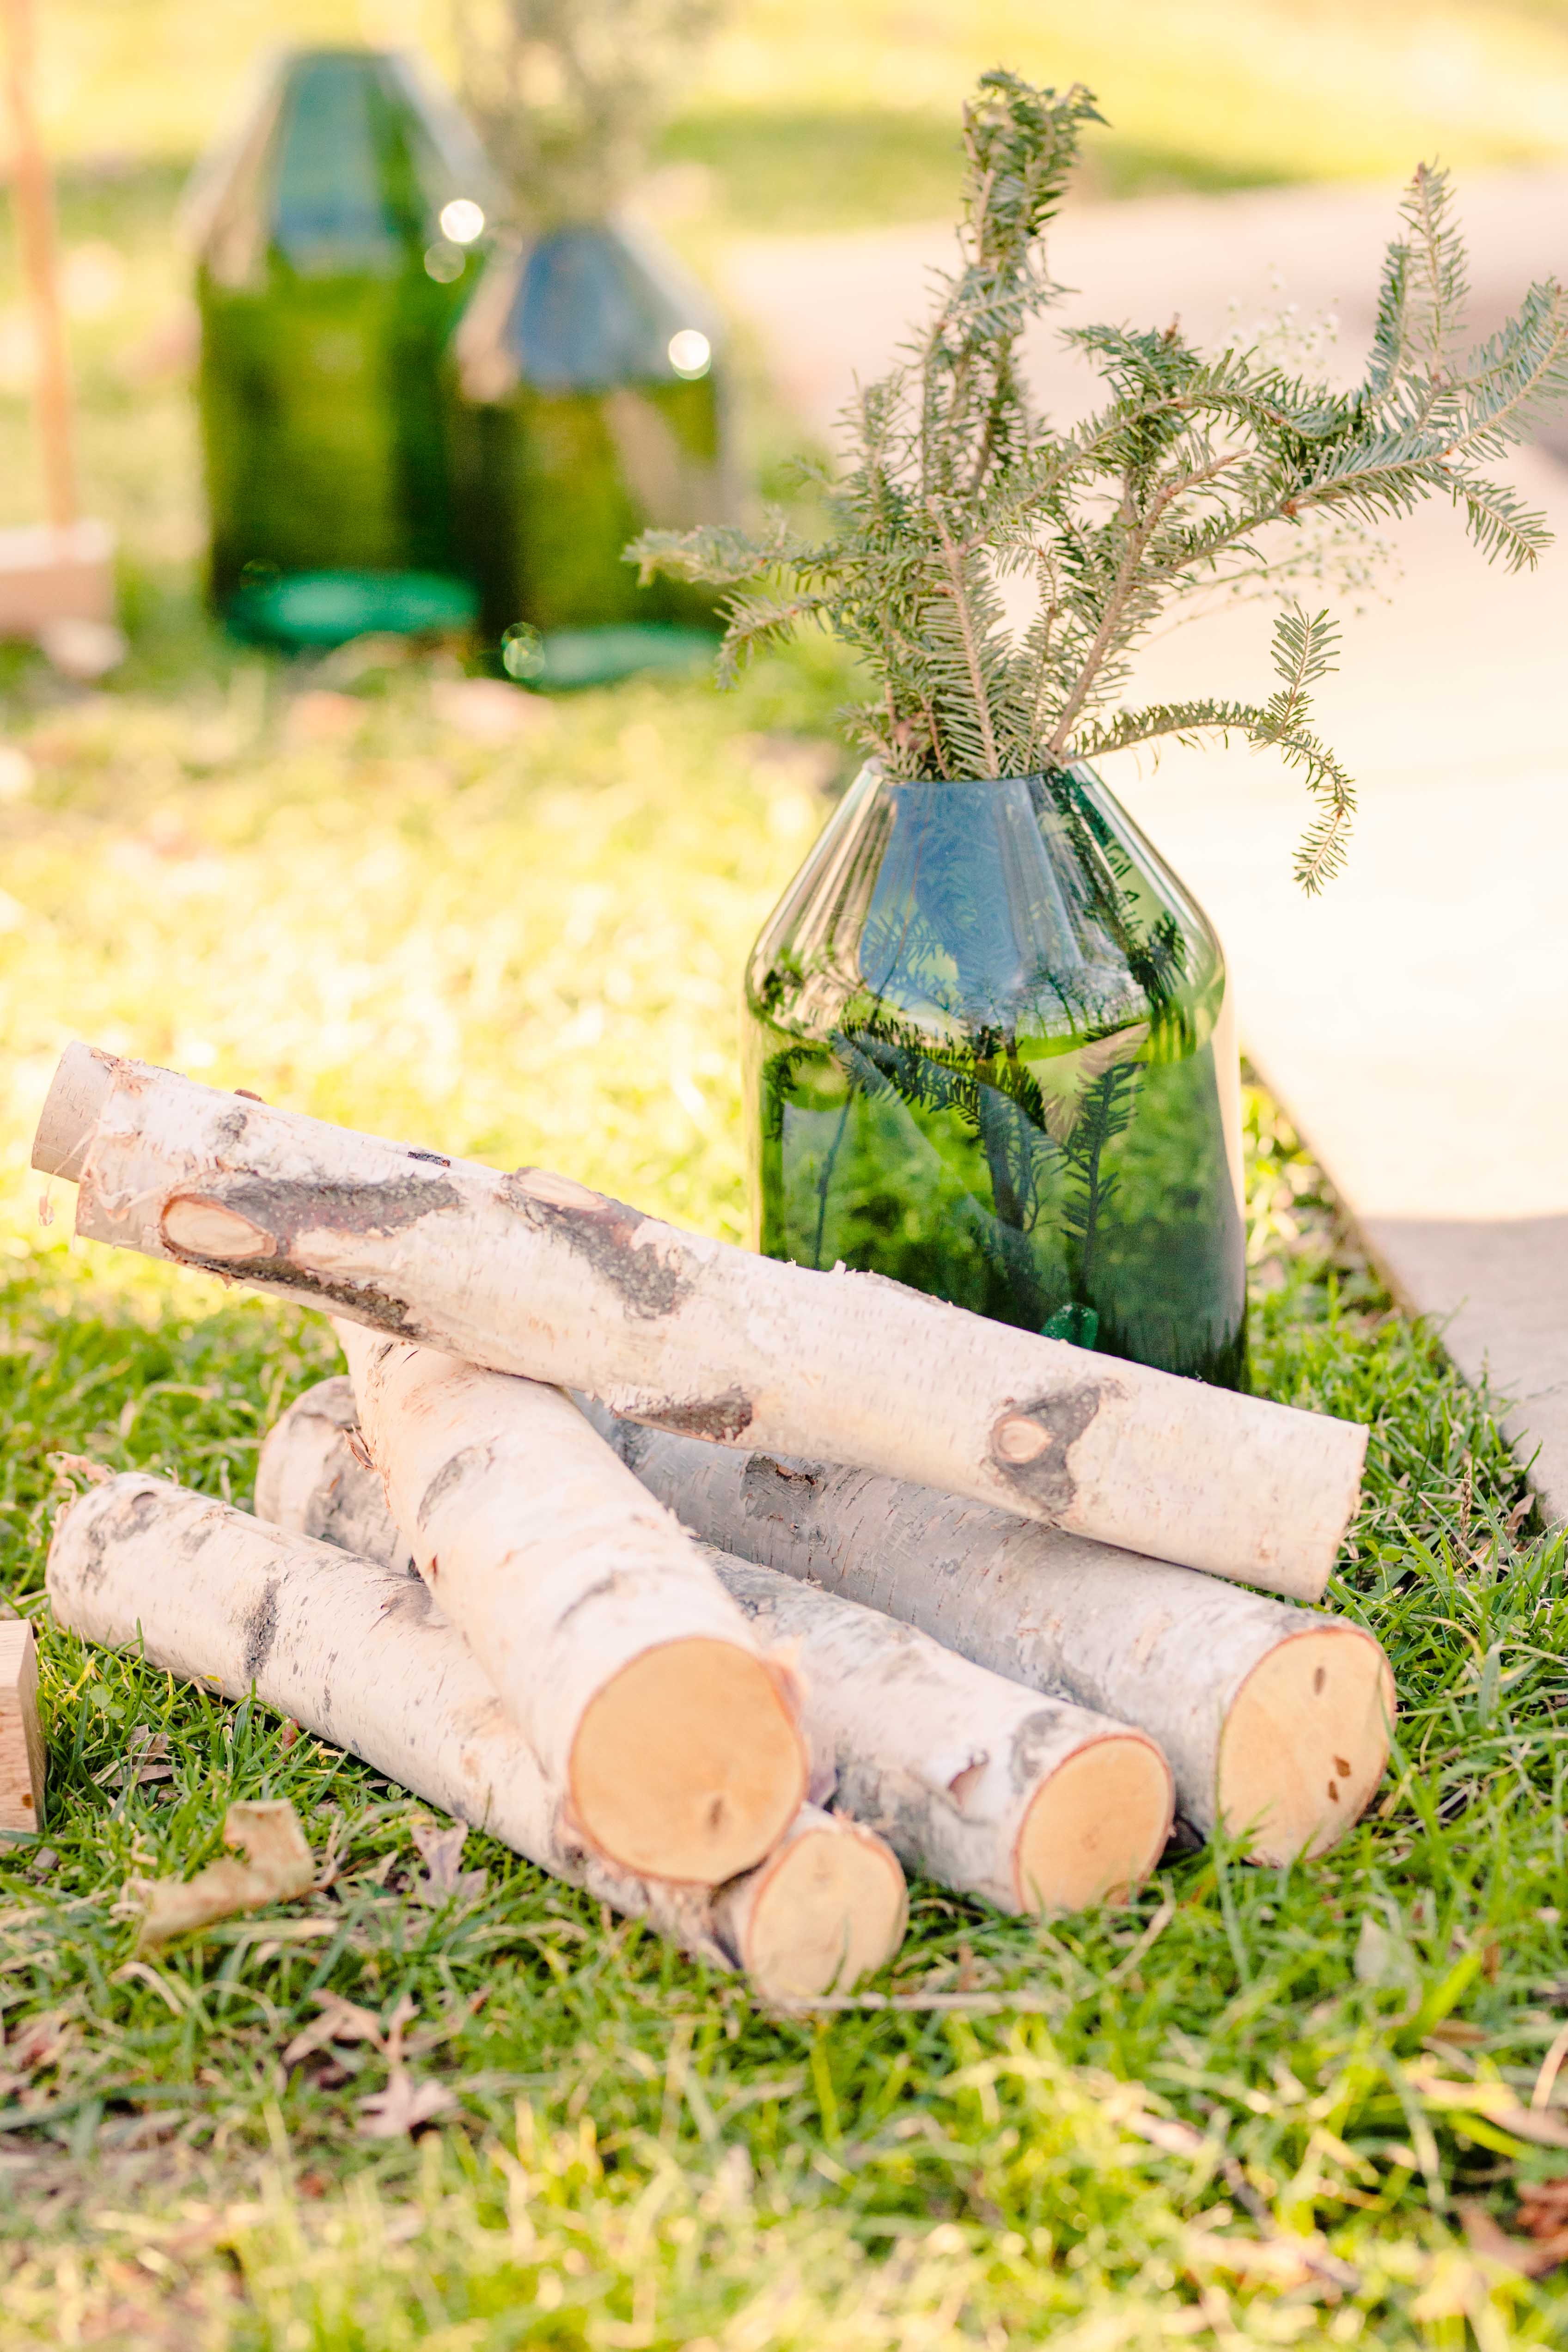 A pile of logs rest next to a green jar of greenery in front of a wedding arch for a styled shoot styled by Atwater Lane